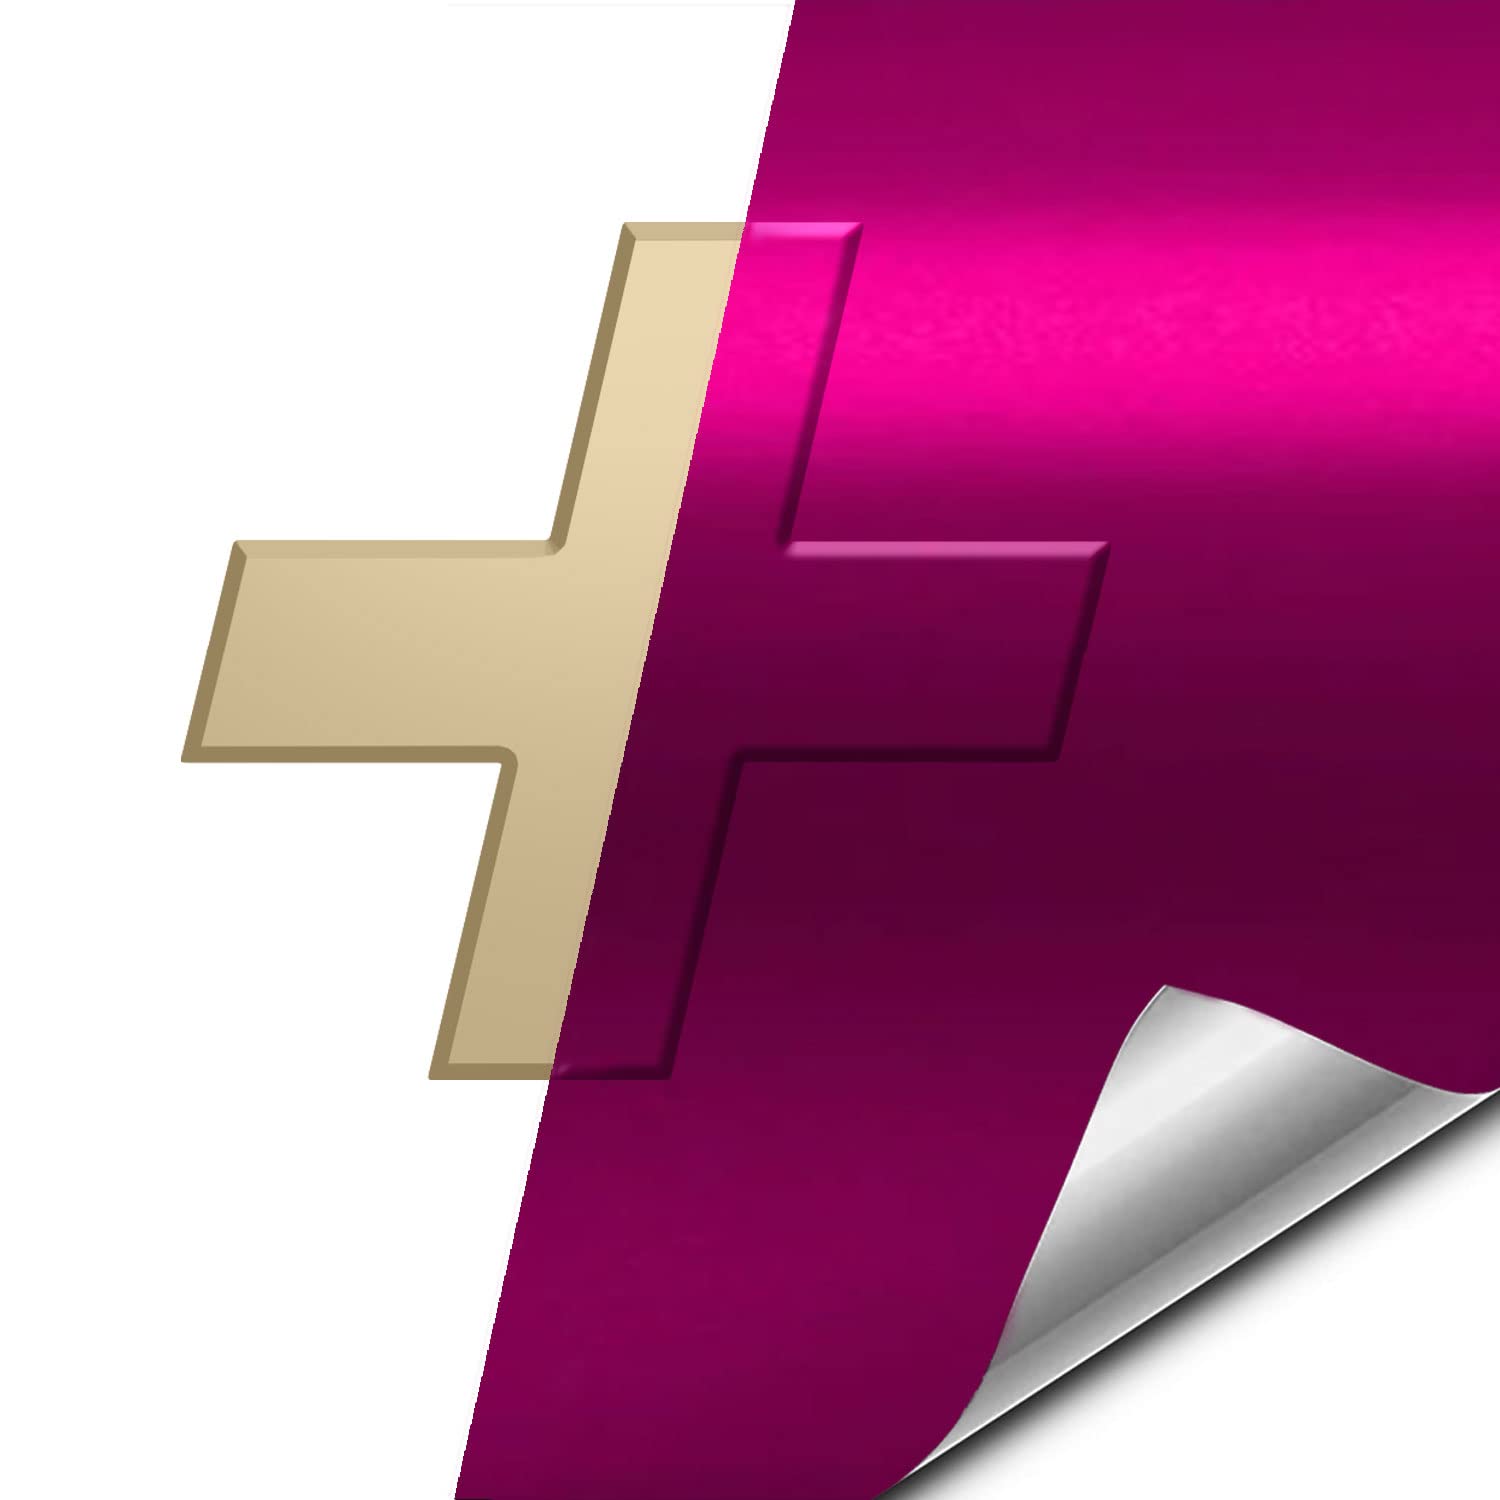 VViViD Auto Emblem Vinyl Wrap, Pink Magenta Chrome, Compatible With Chevy Bowtie Logo, 11.8 Inches x 4 Inches sheets (x2)